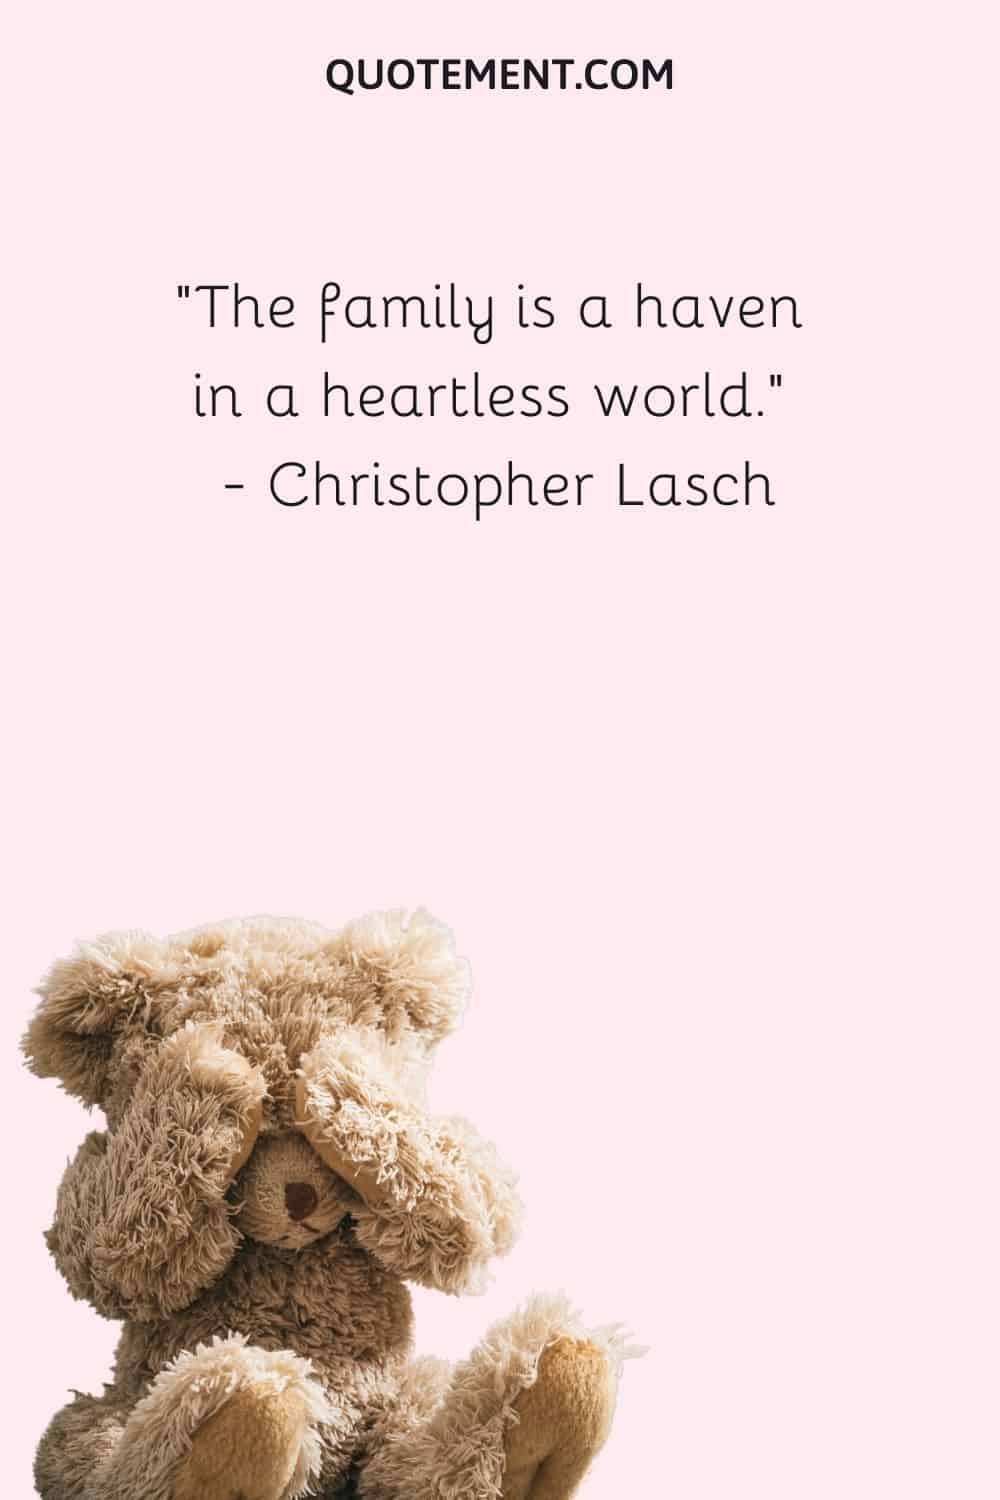 The family is a haven in a heartless world. — Christopher Lasch